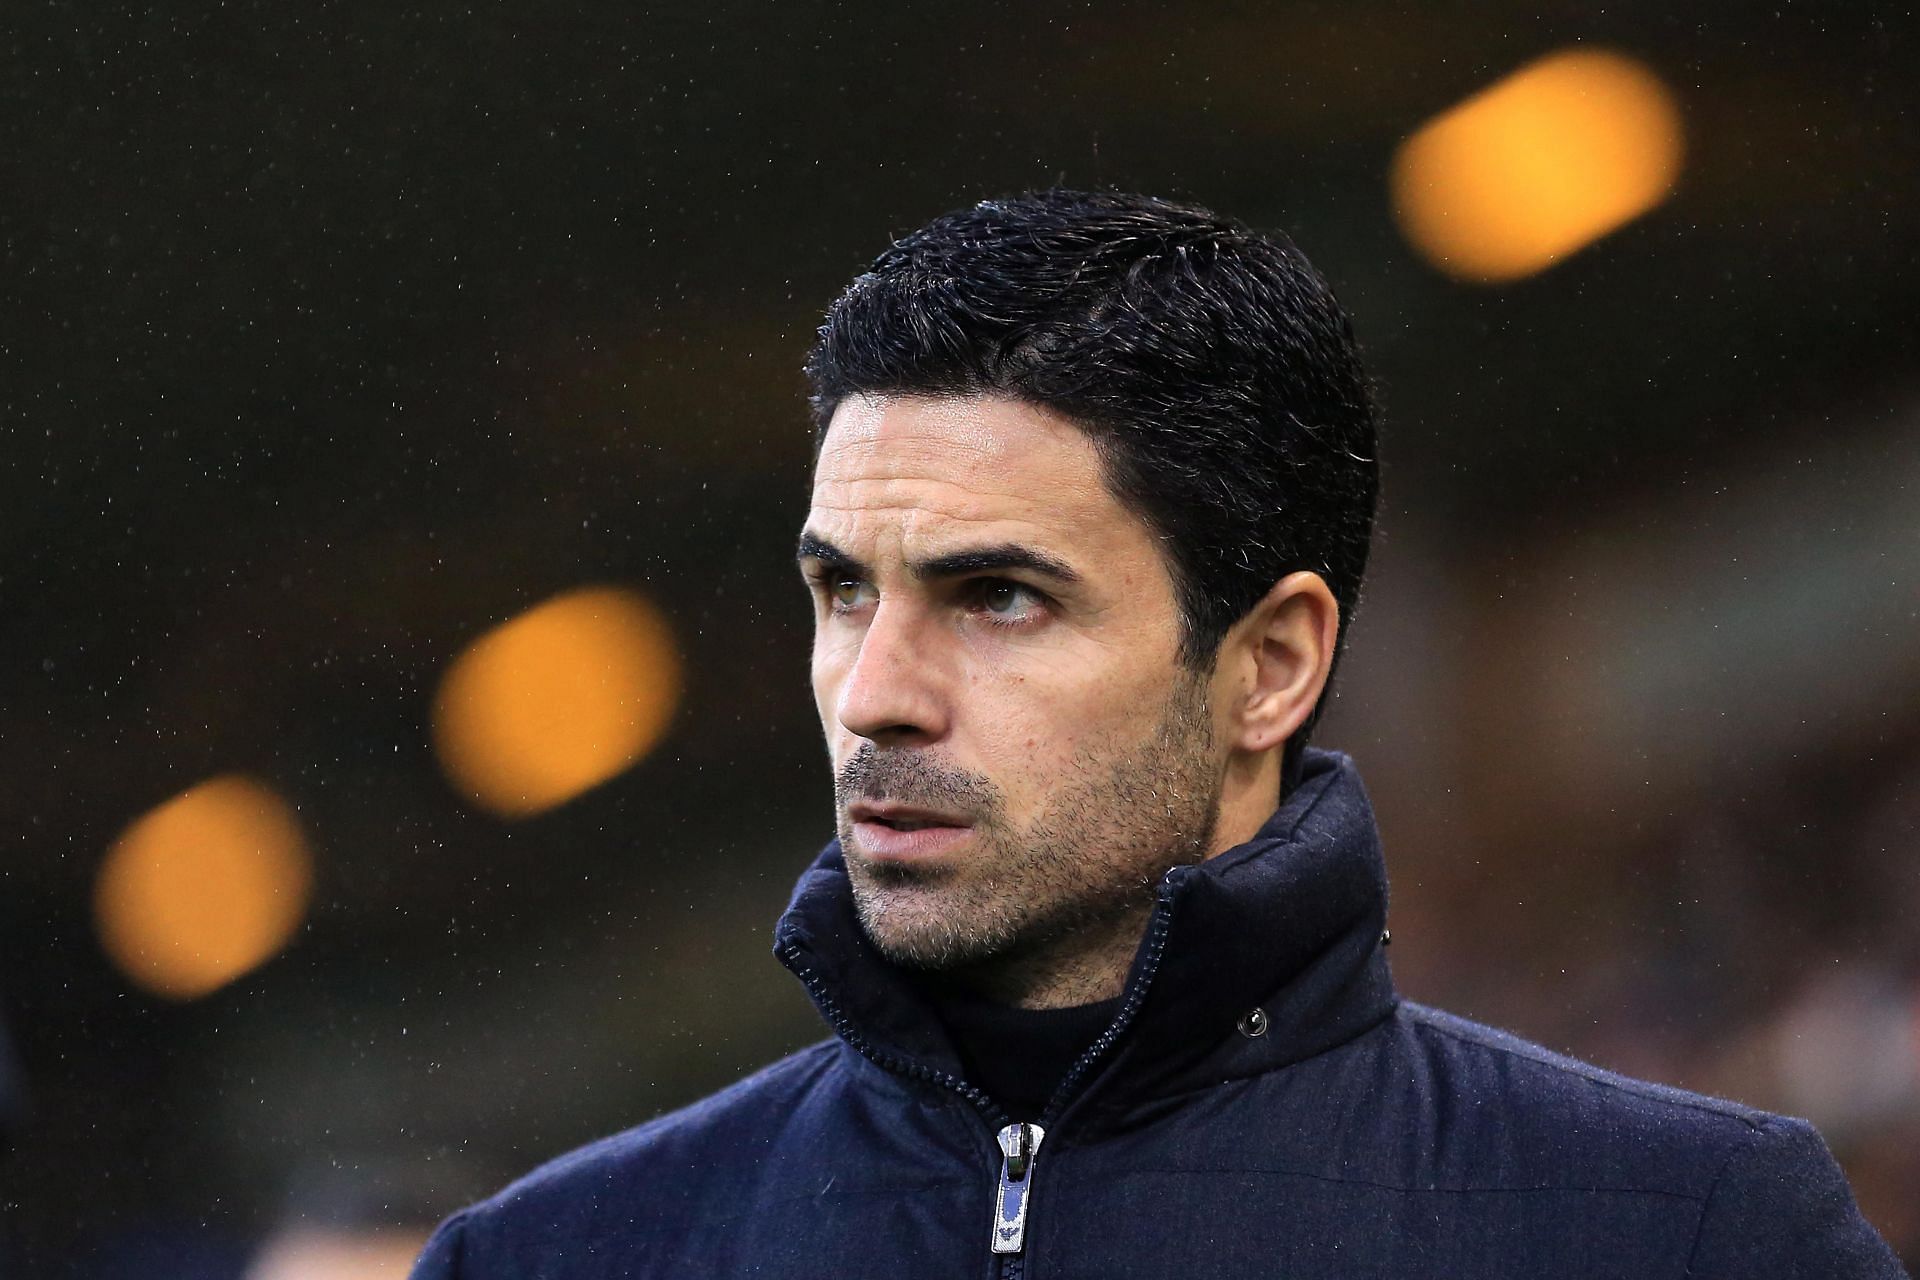 Arsenal manager Mikel Arteta is fighting to secure a top-four finish.